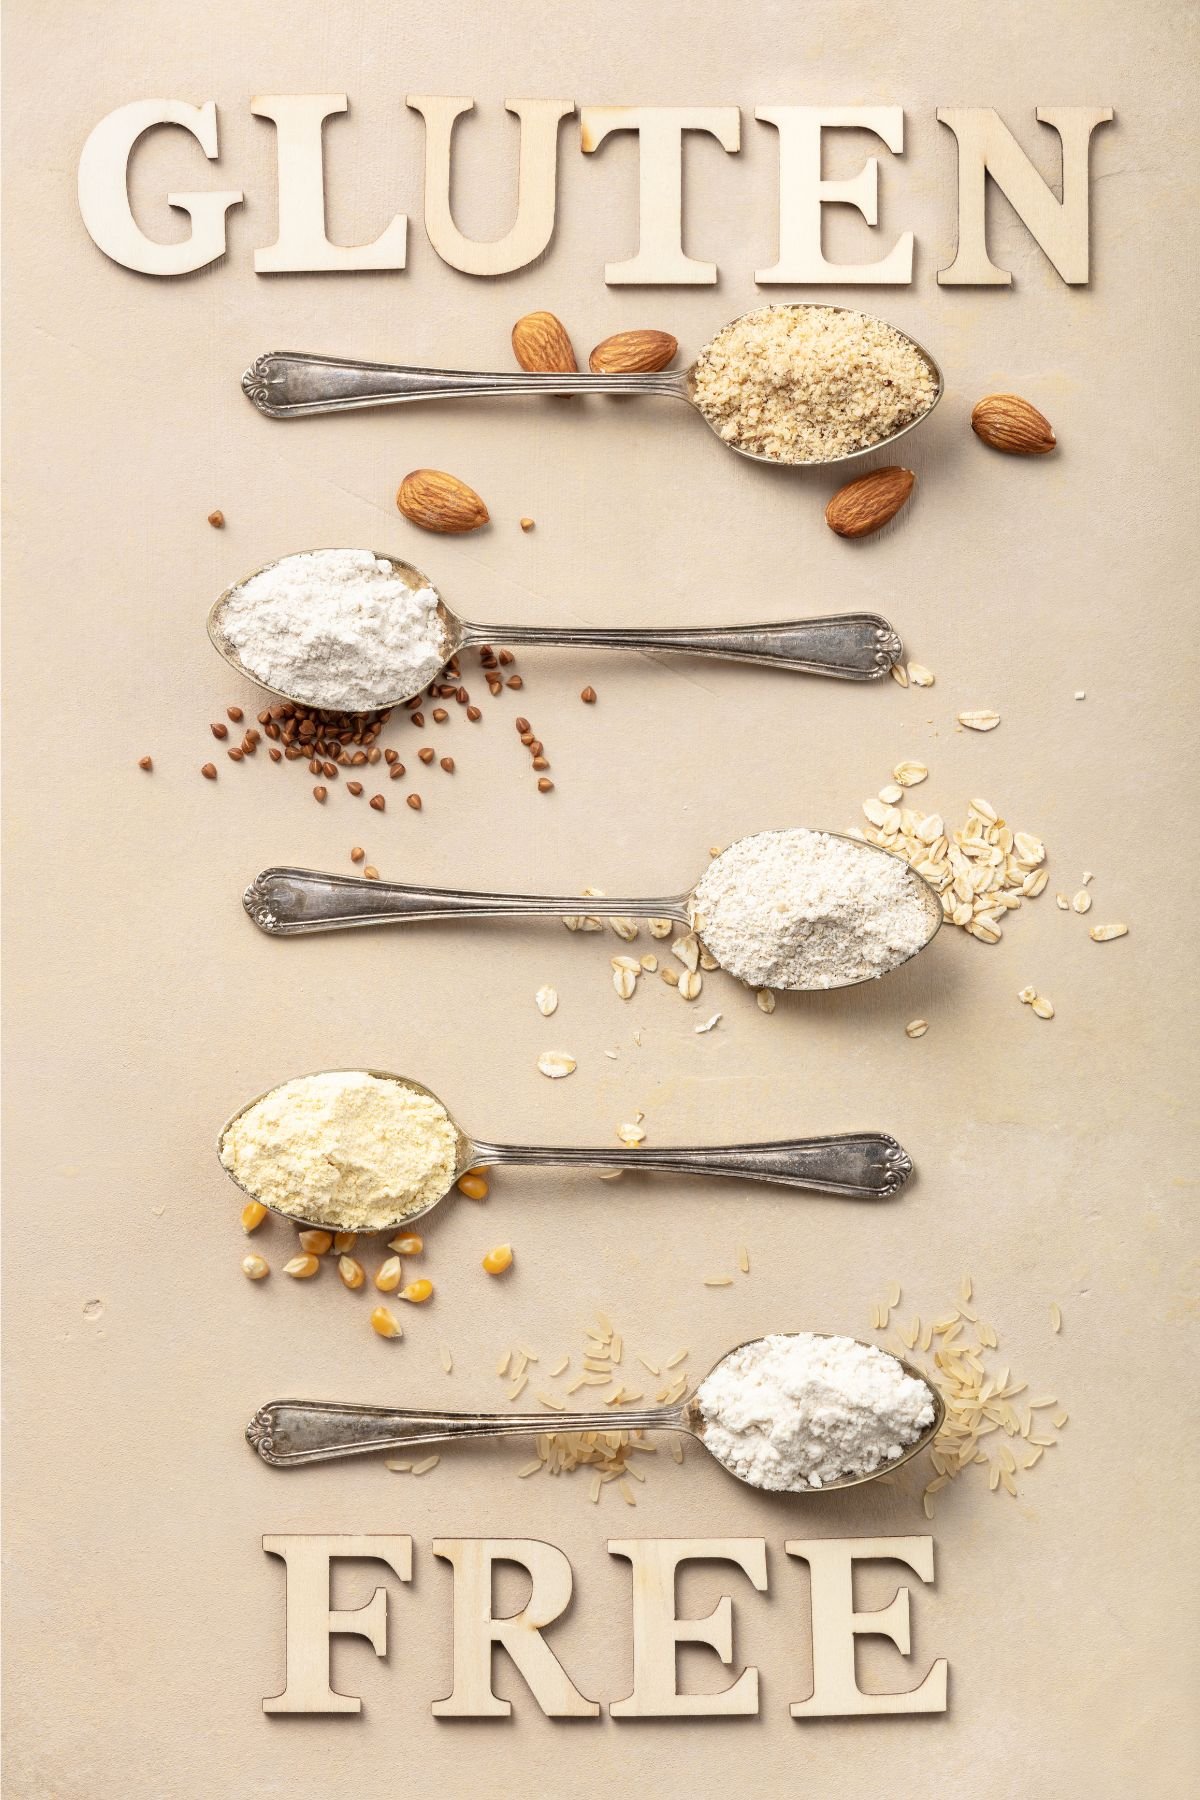 Gluten free flours on spoons placed horizontal.